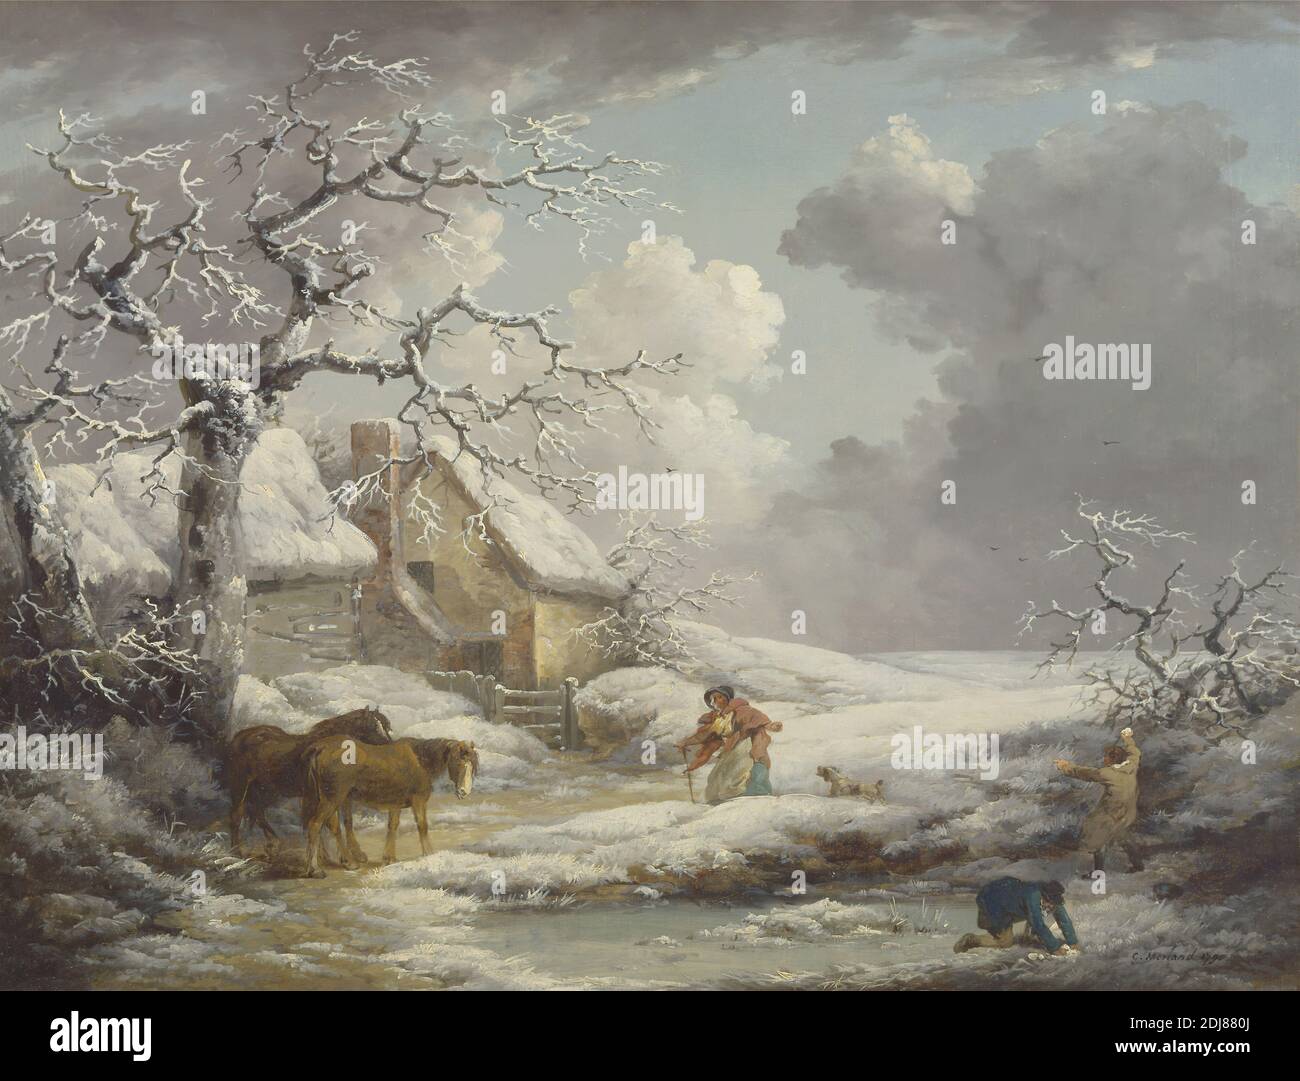 Winter Landscape, George Morland, 1763–1804, British, 1790, Oil on canvas, Support (PTG): 27 1/2 x 35 1/2 inches (69.9 x 90.2 cm), animals, bonnet, cane, chimney (architectural element), clouds, cold, cottage, dog (animal), family, farmhouse, frozen, games, gate, genre subject, hats, horses (animals), ice, landscape, men, outerwear, pond, redingote (overcoat), rural, shawl, shawls, sky, snow, thatching, trees, winter, woman Stock Photo